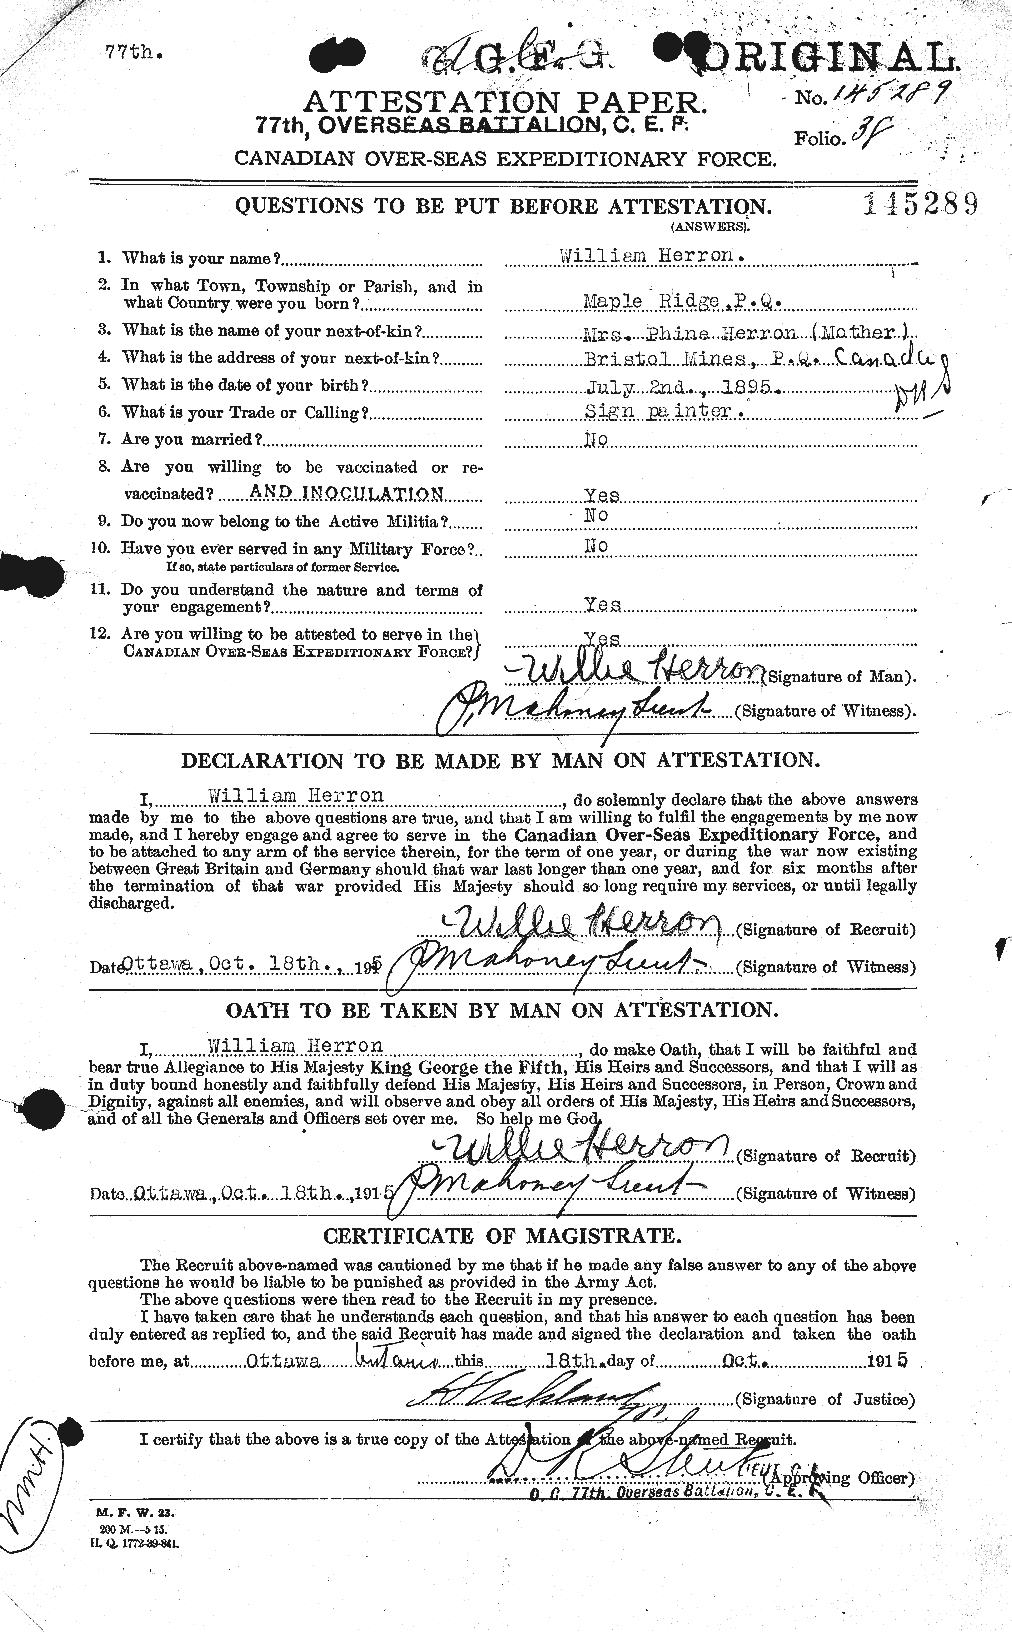 Personnel Records of the First World War - CEF 390388a